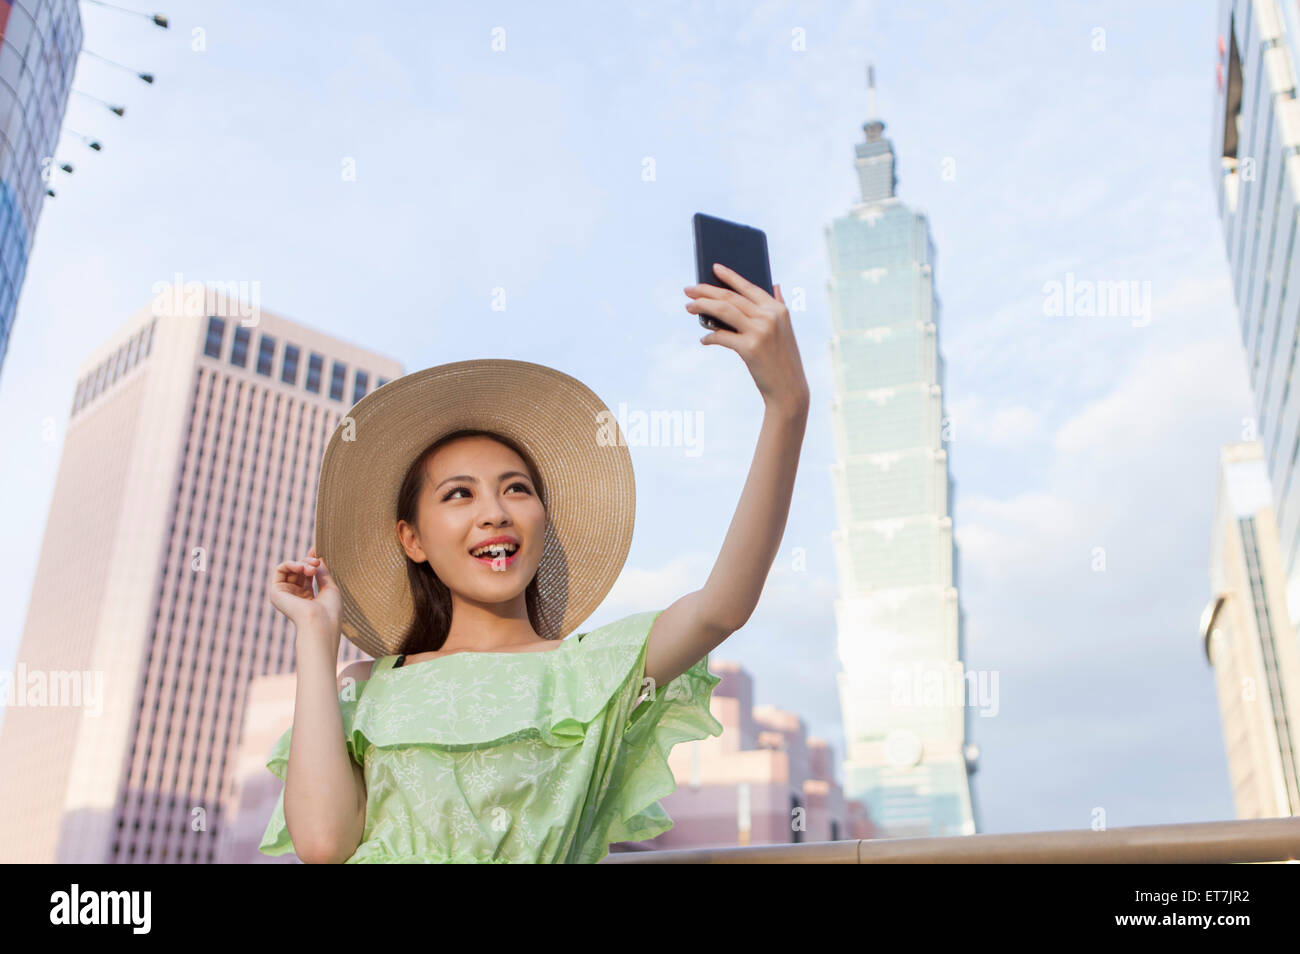 Young woman taking photos with smart phone and smiling Stock Photo